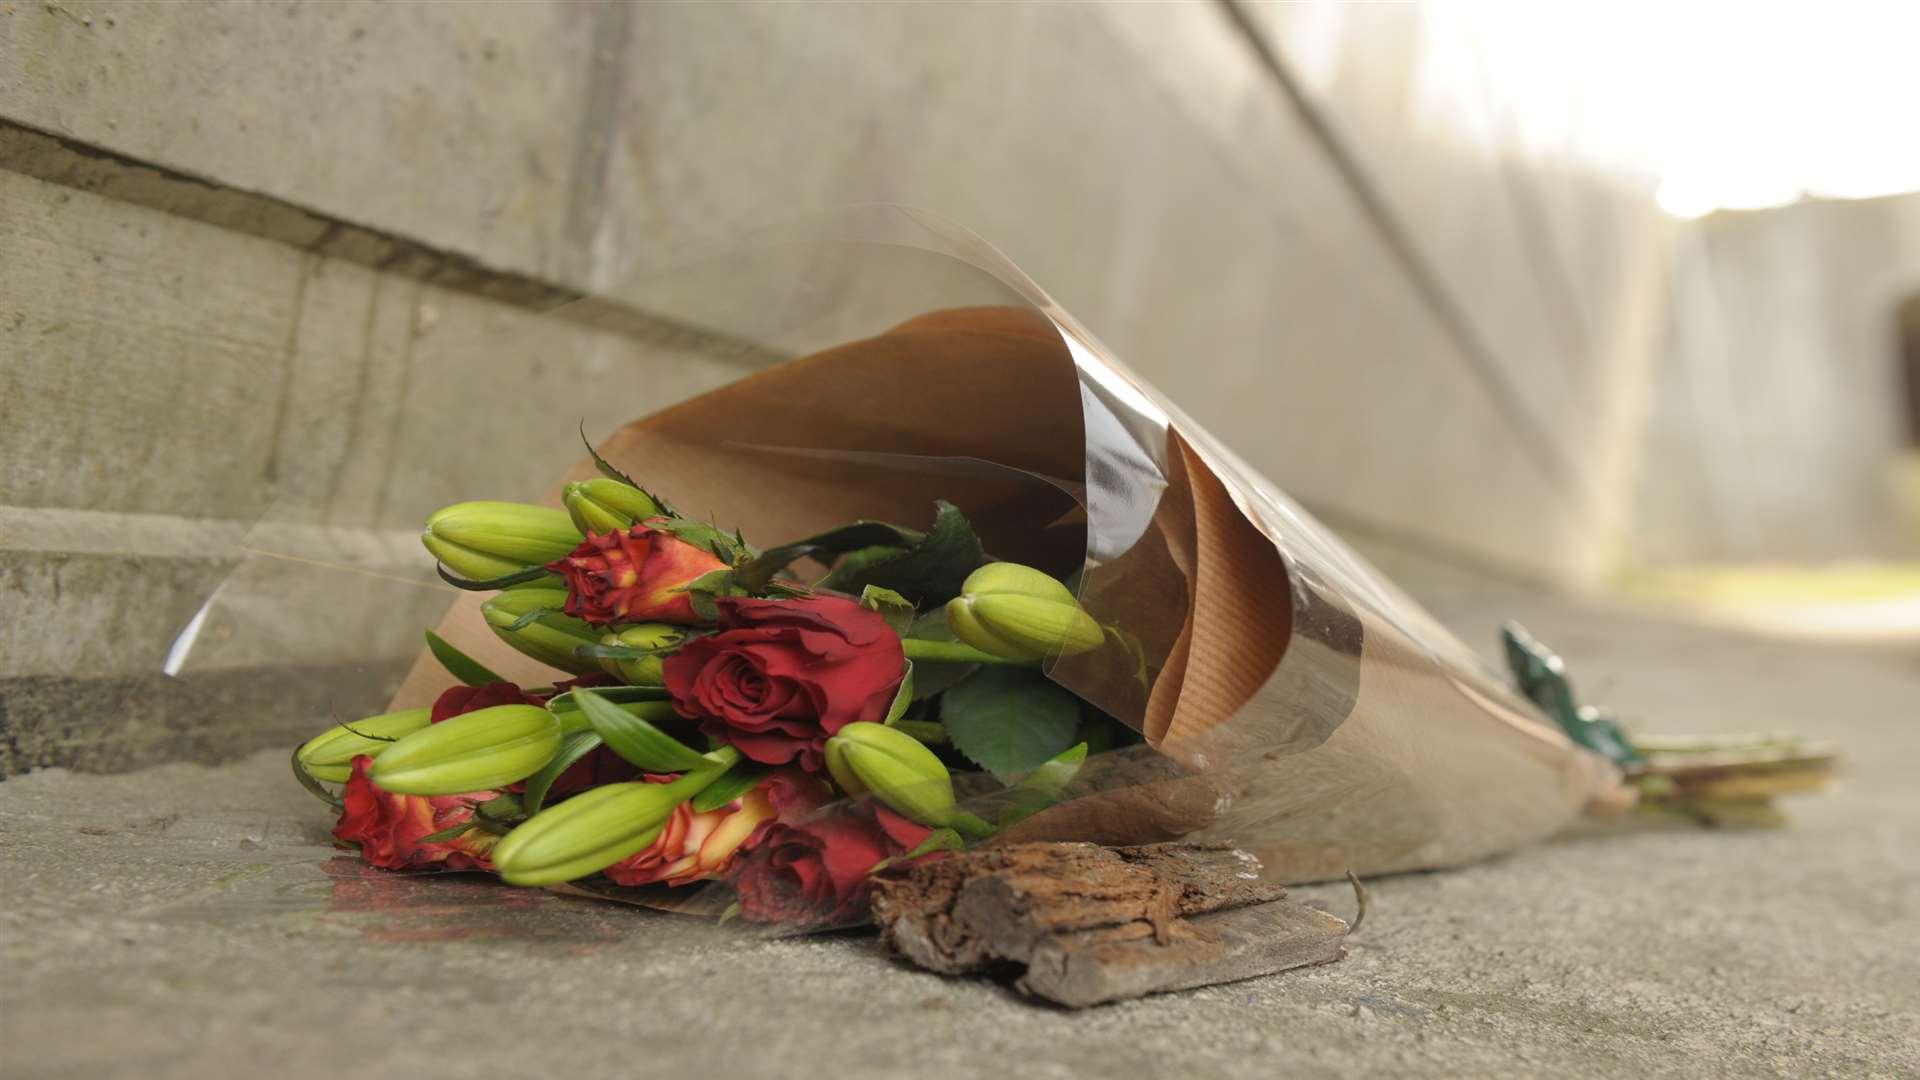 Flowers left at the scene of the tragedy